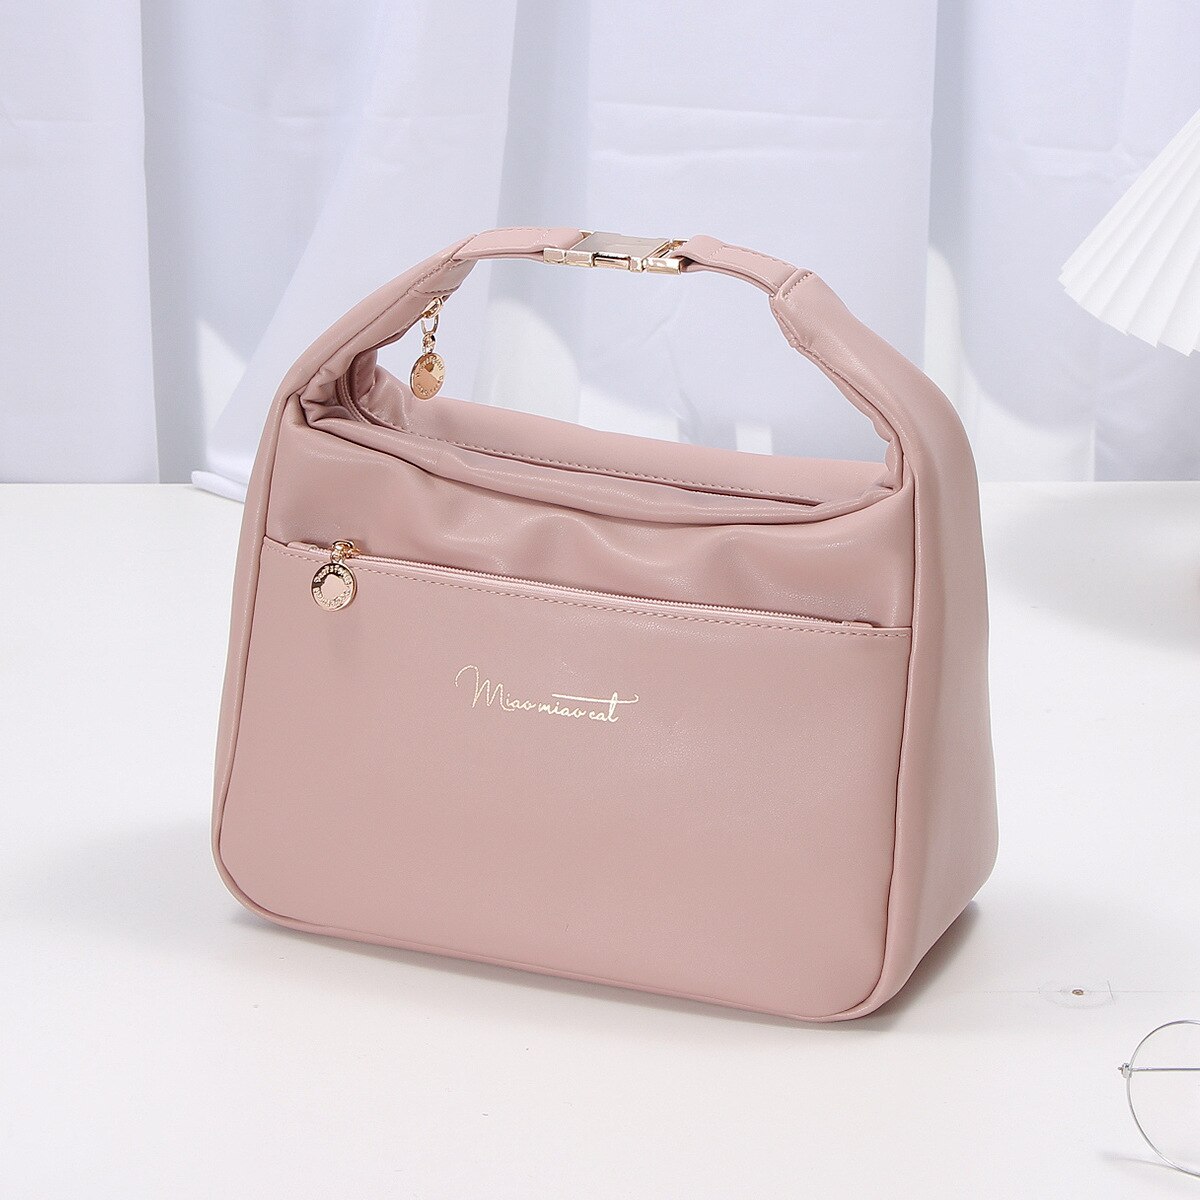 Bento Bag, PU Leather Lunch Box Bag, Aluminum Foil Insulation BagIce Pack, High-value Lunch Box Bag